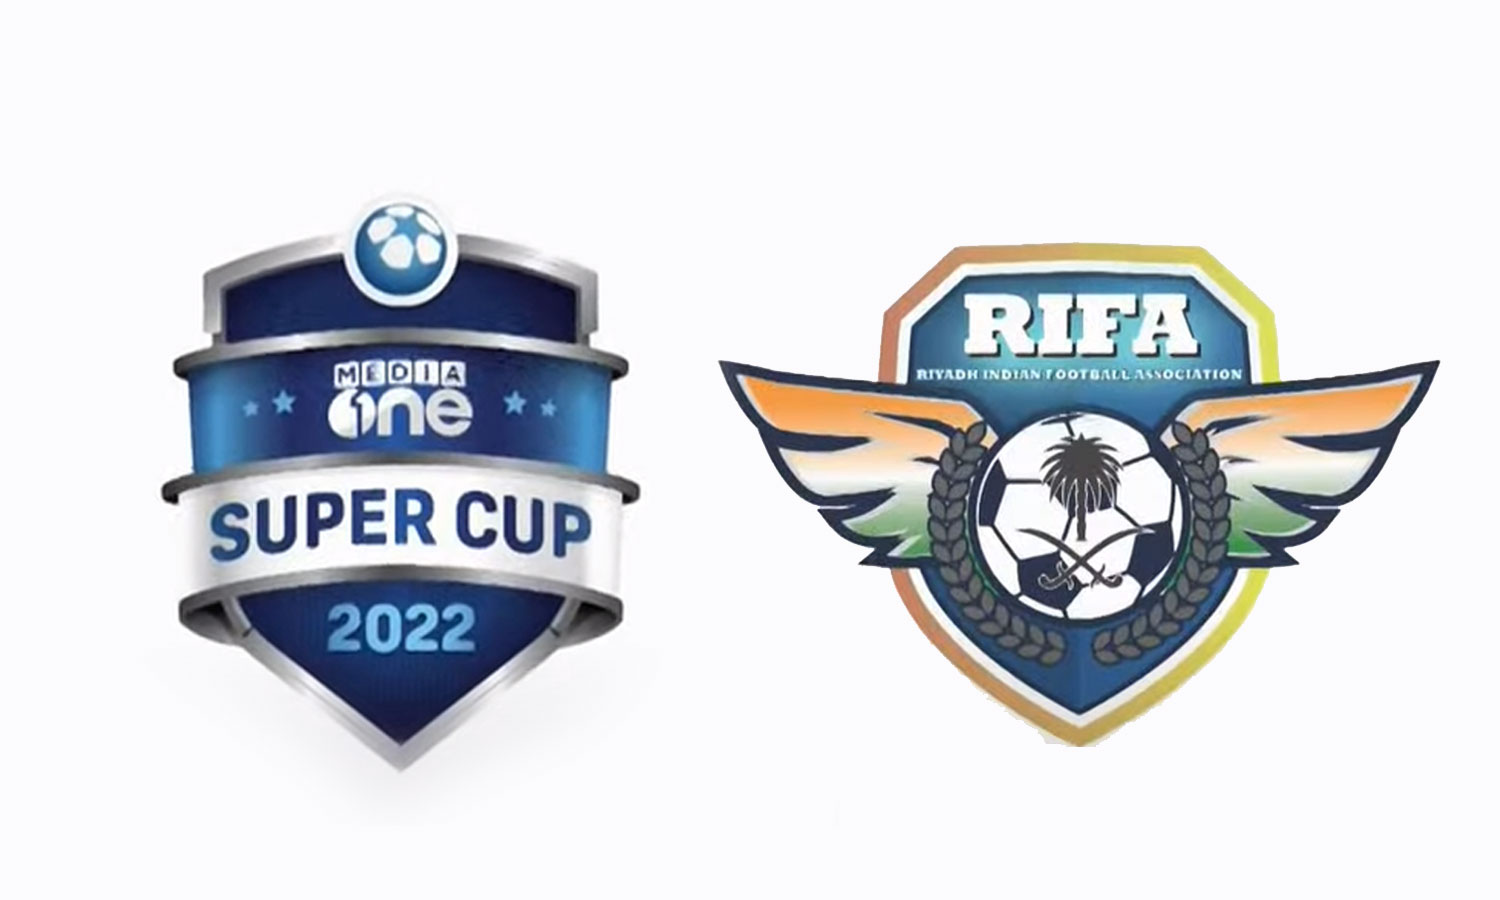 MediaOne Super Cup in Saudi Arabia; Eight teams will compete time